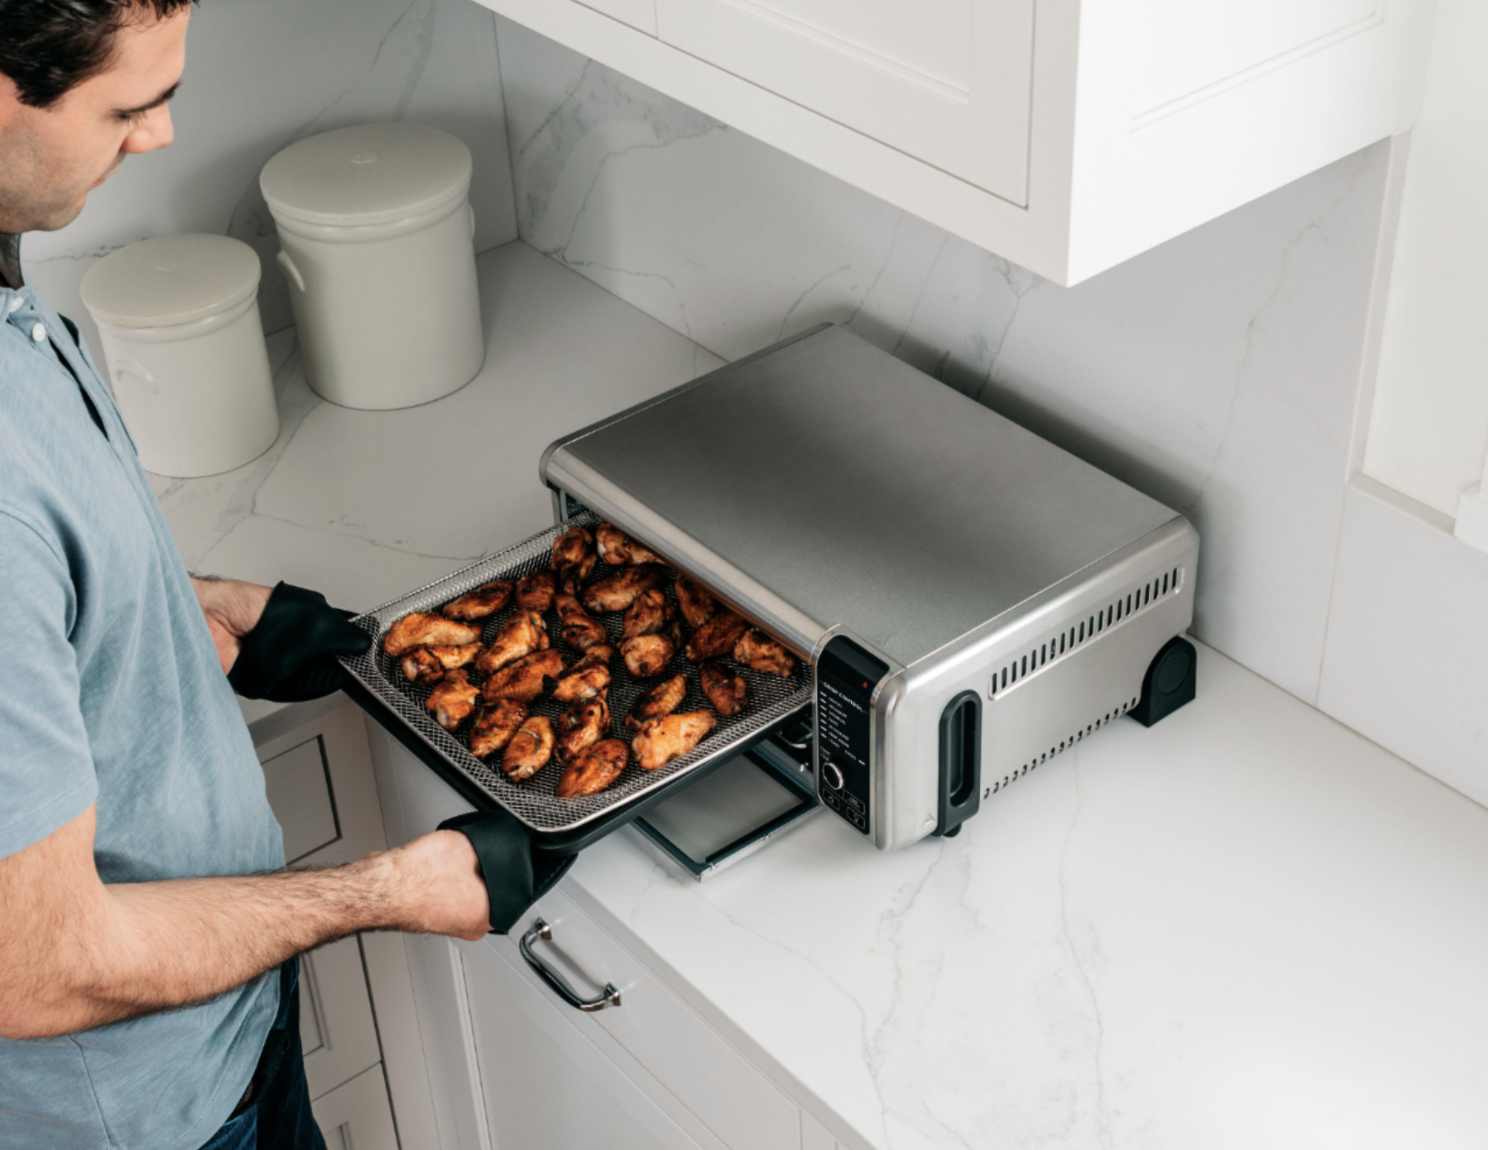 10 Dorm Appliances Perfect for Healthy Cooking in a Small Space